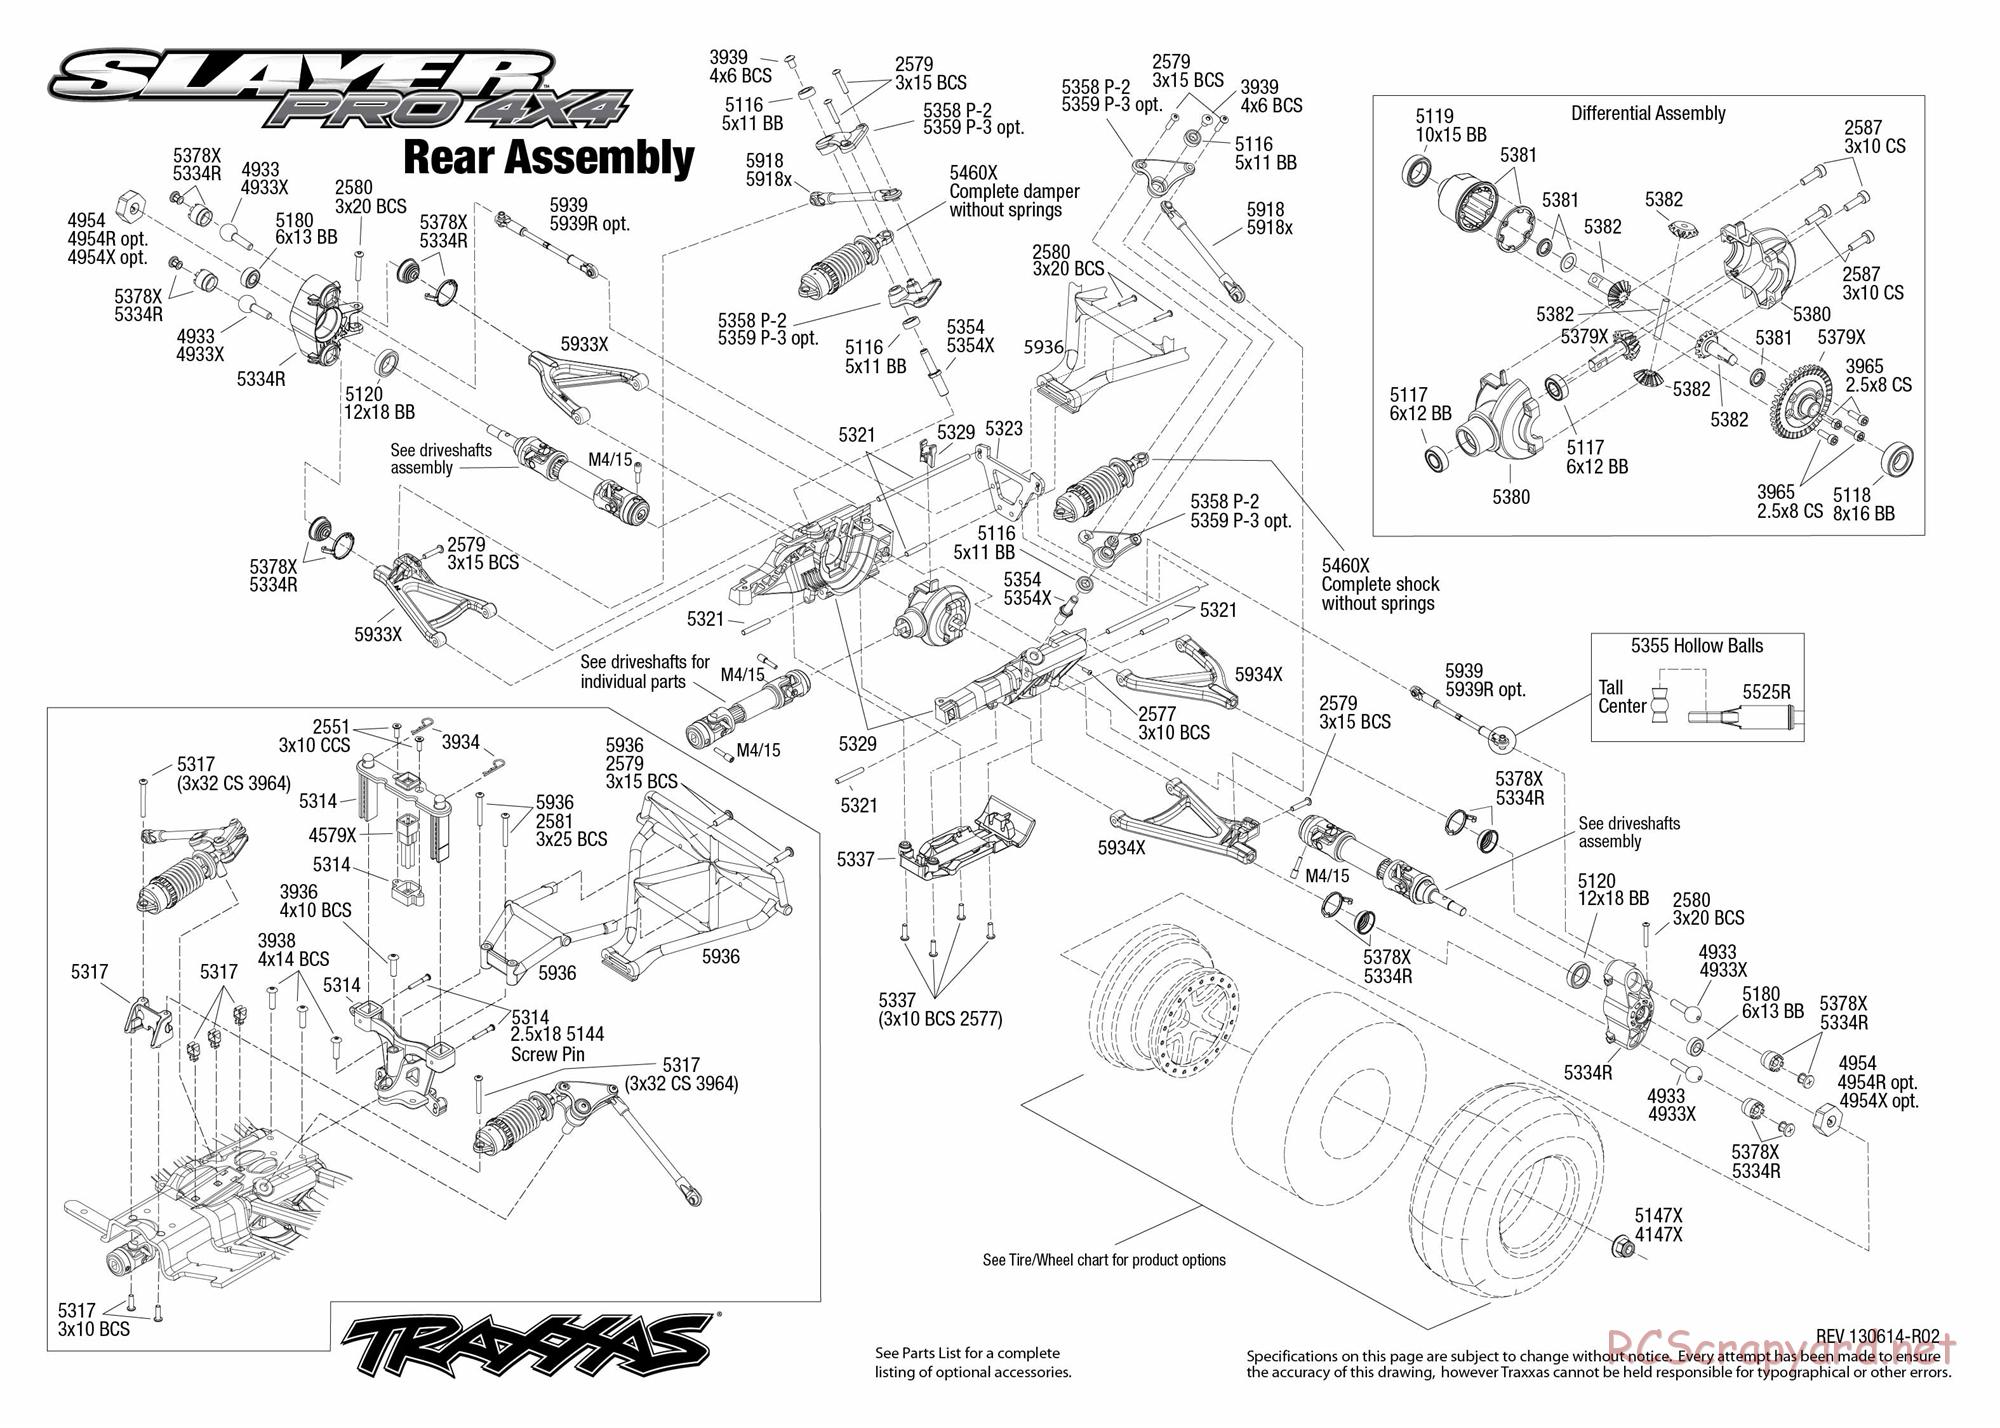 Traxxas - Slayer Pro 4x4 (2012) - Exploded Views - Page 5